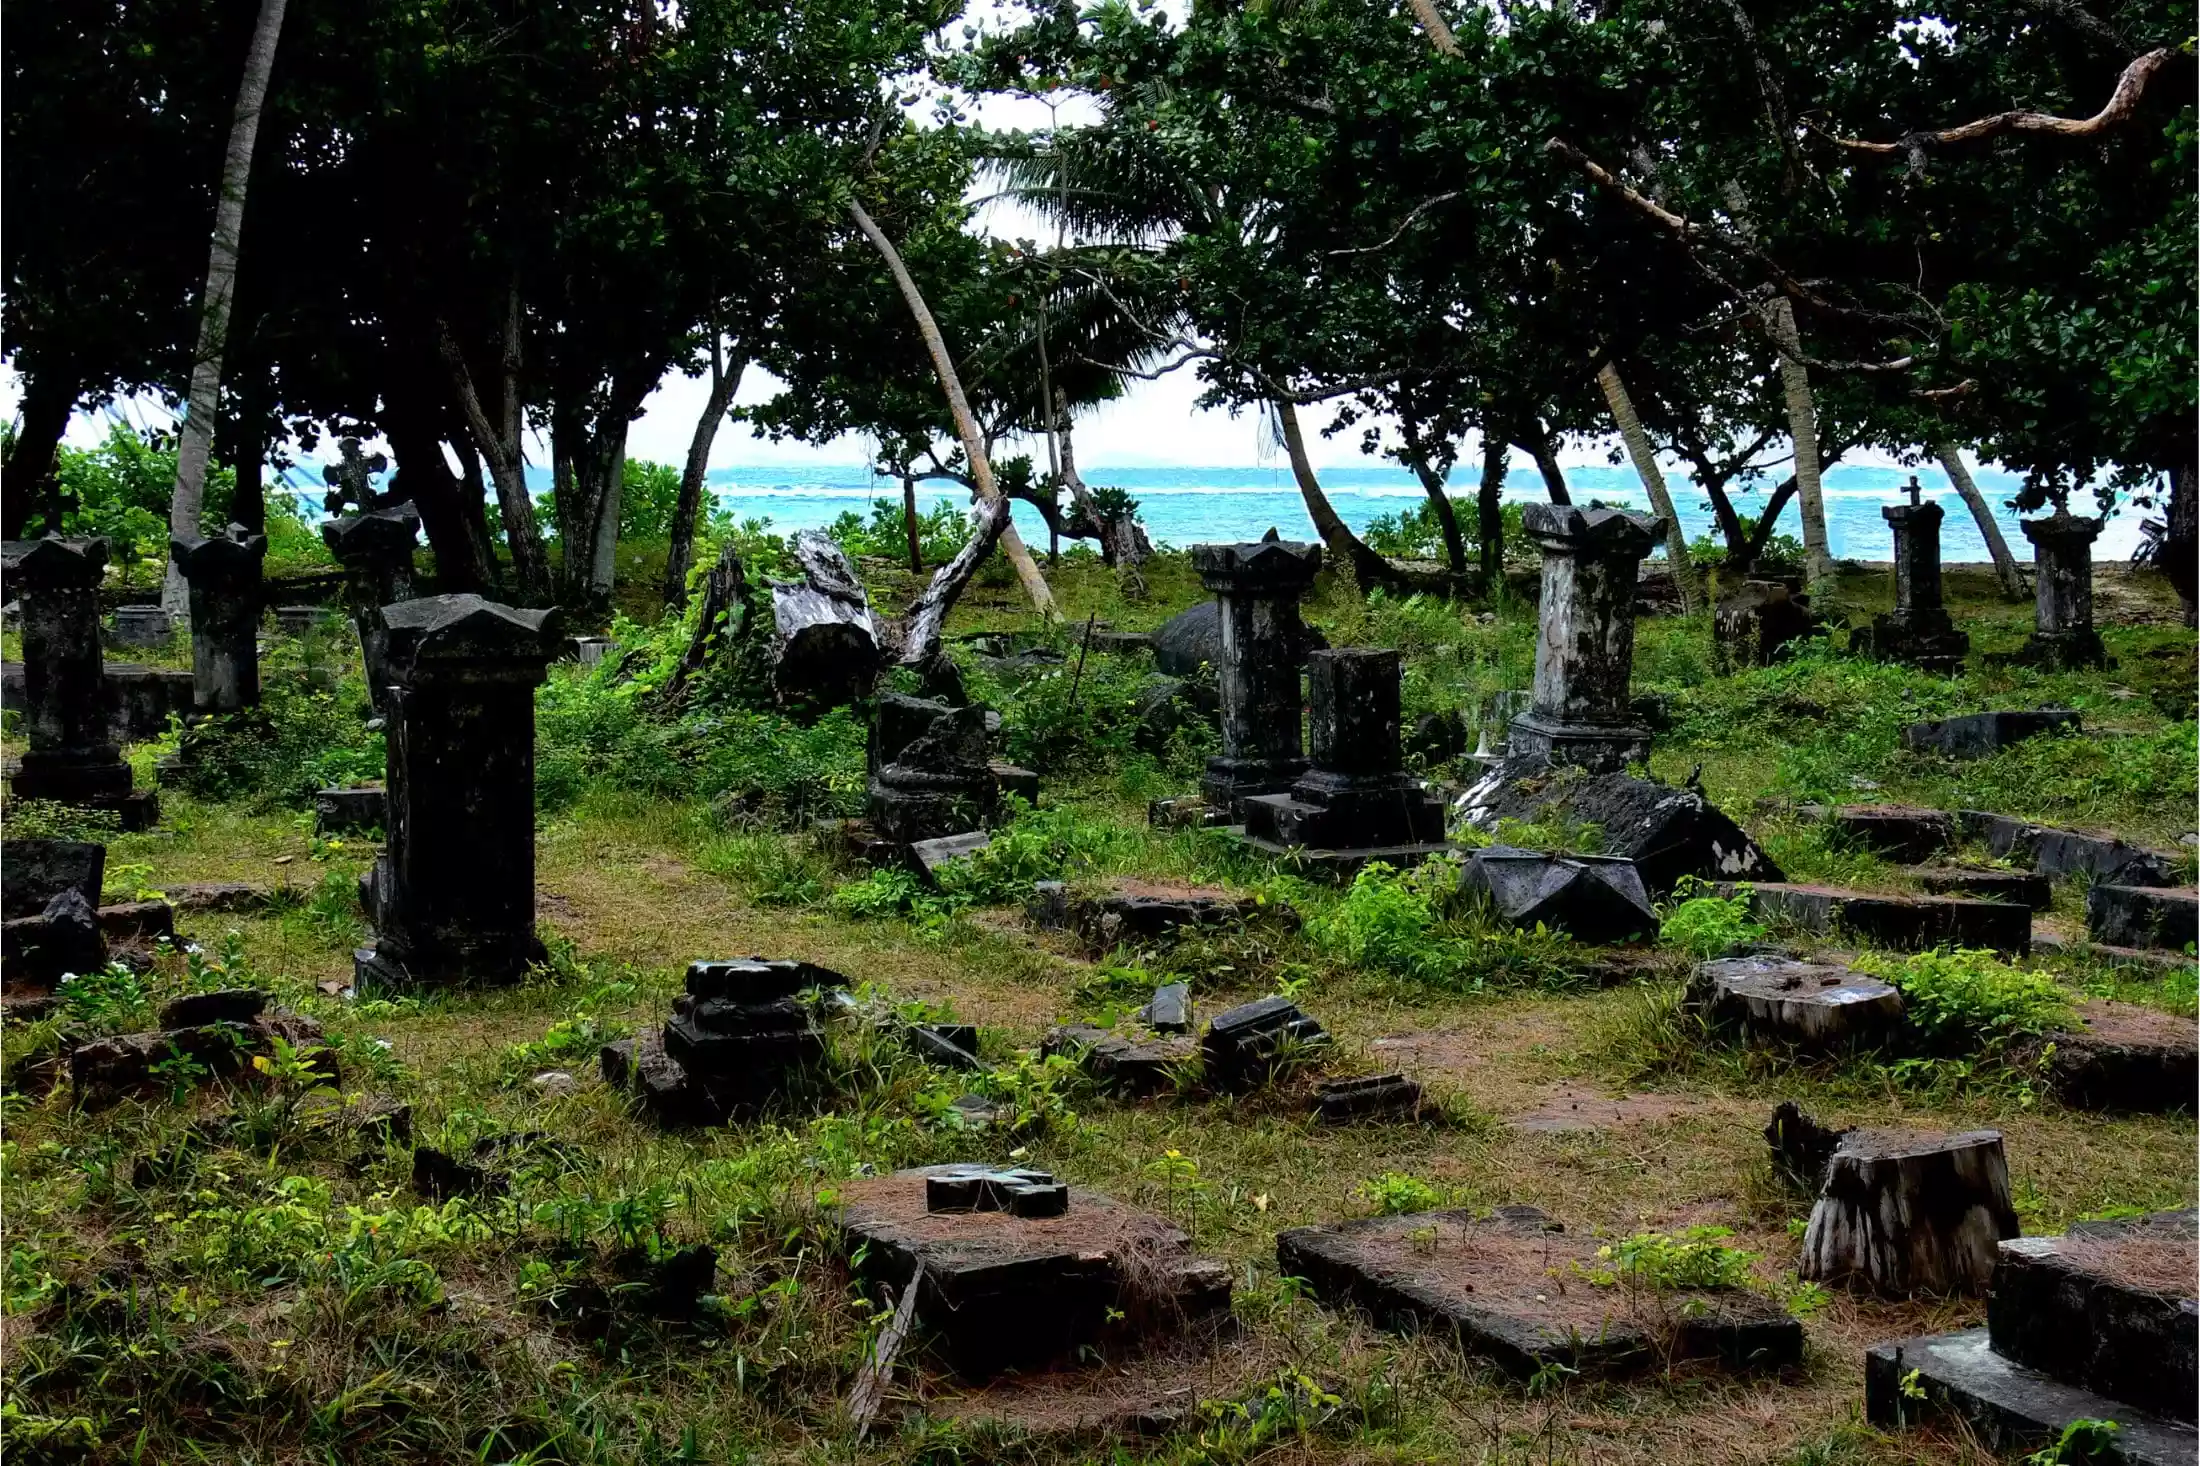 Pirate cemetery in the Seychelles, next to a beach.